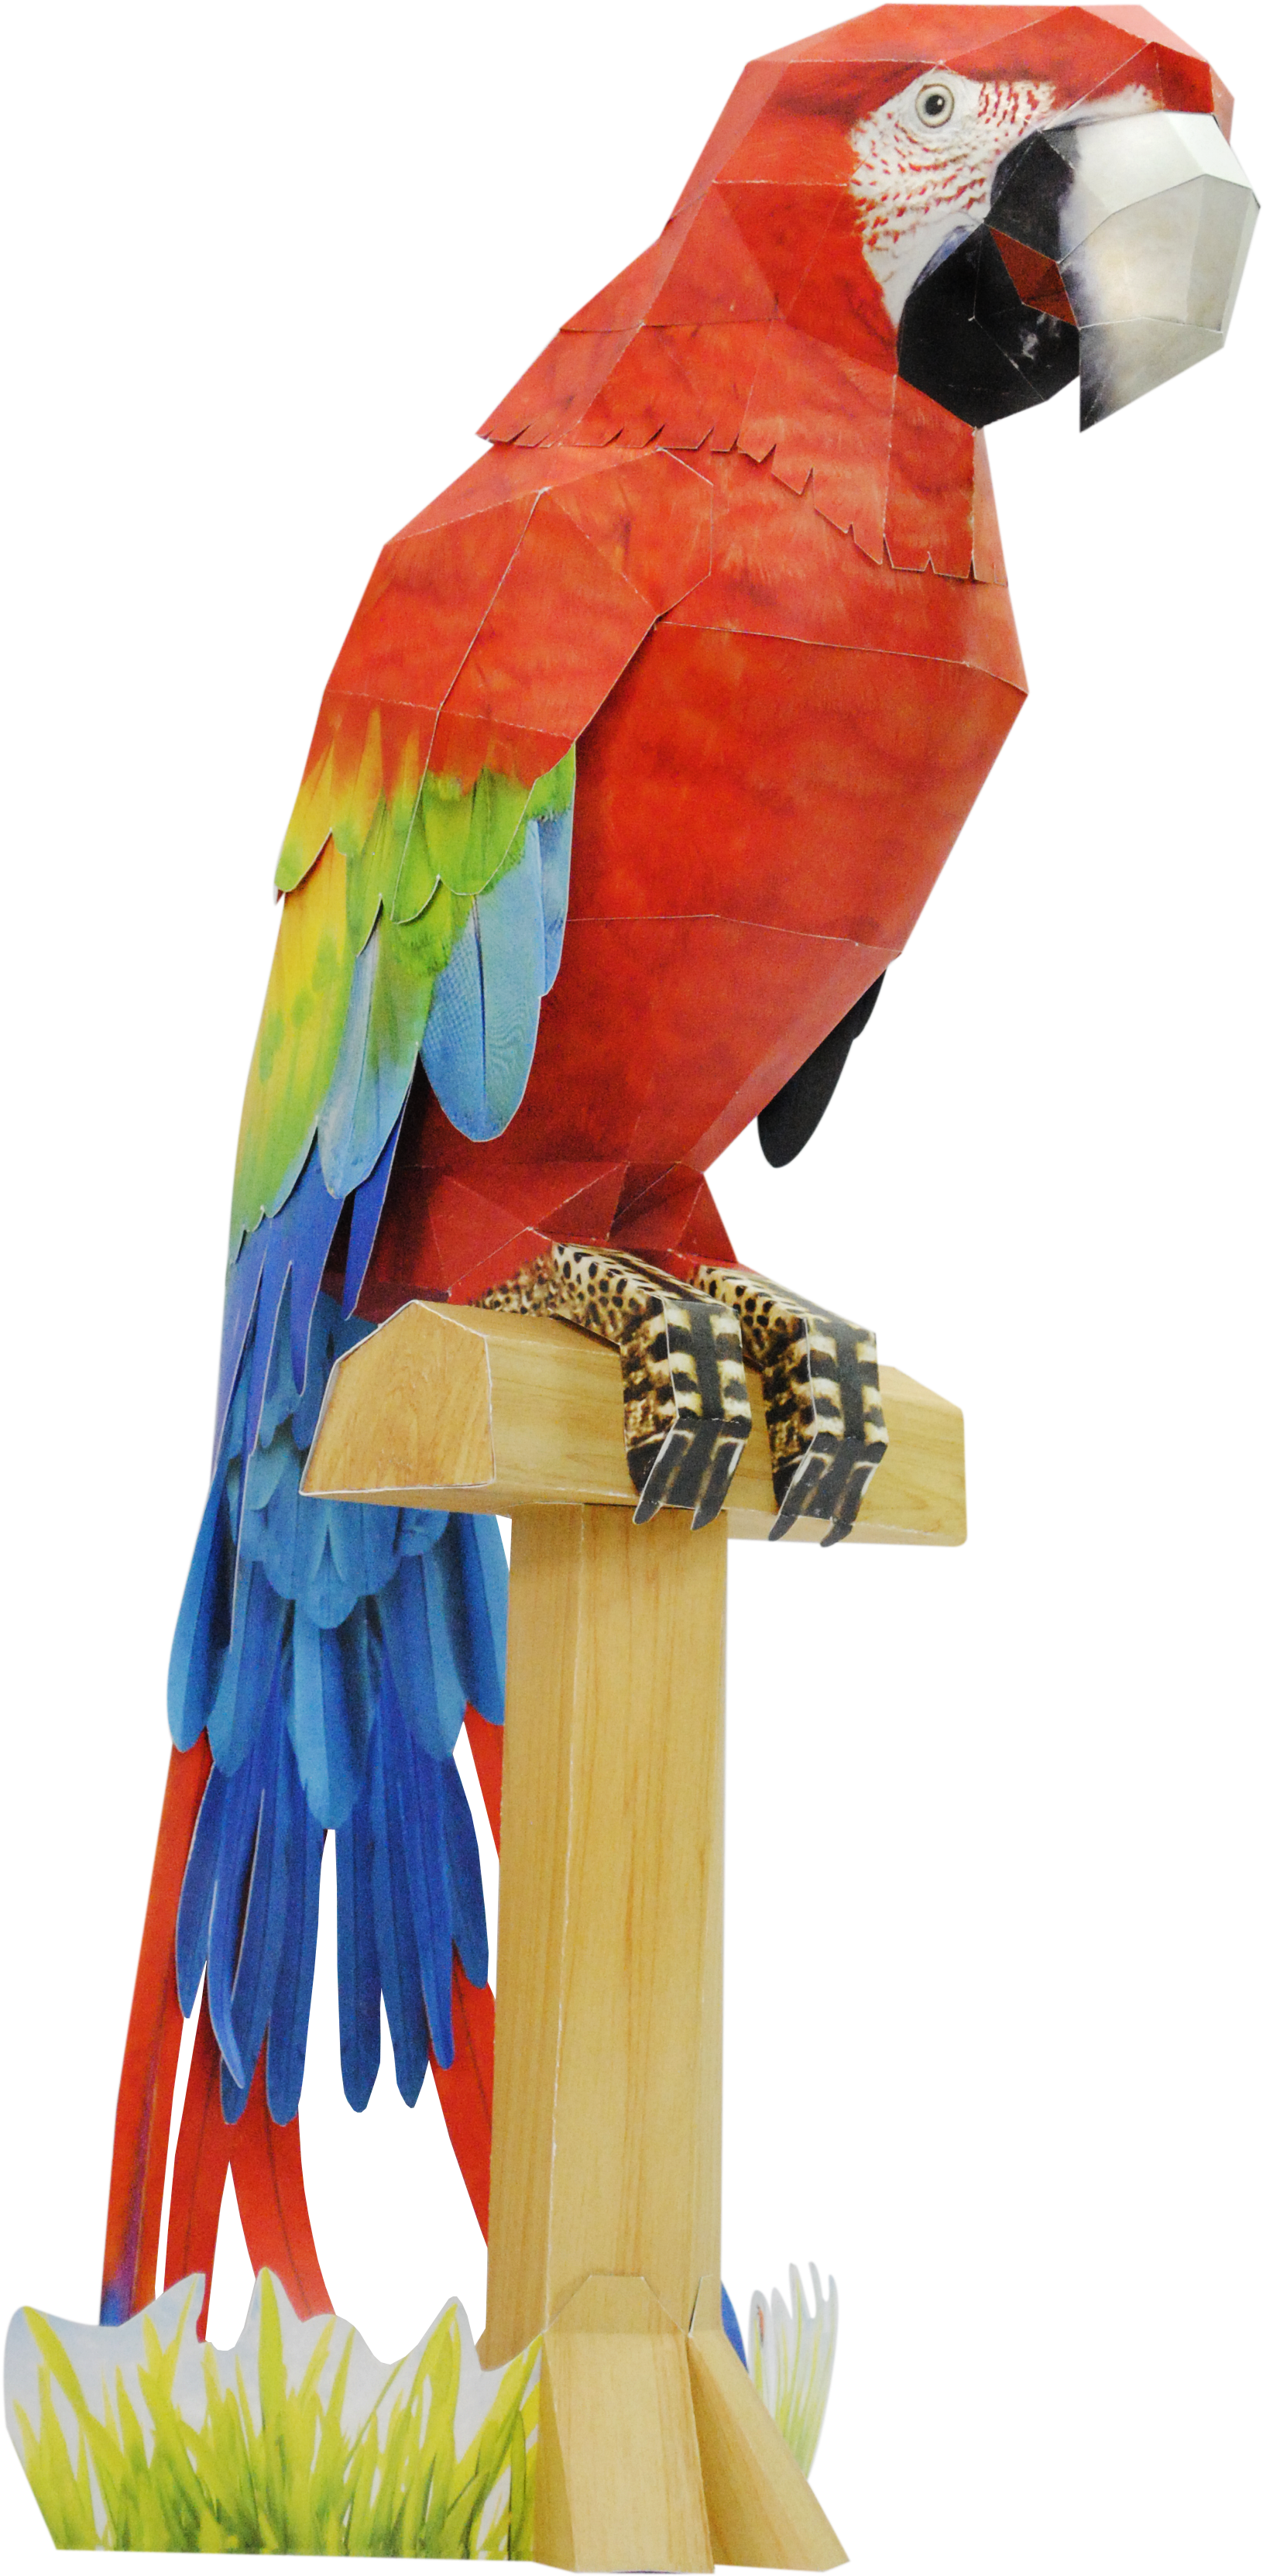 The Scarlet Macaw In Paper By Happy Www Happypapertoy - The Scarlet Macaw In Paper By Happy Www Happypapertoy (2592x3872)